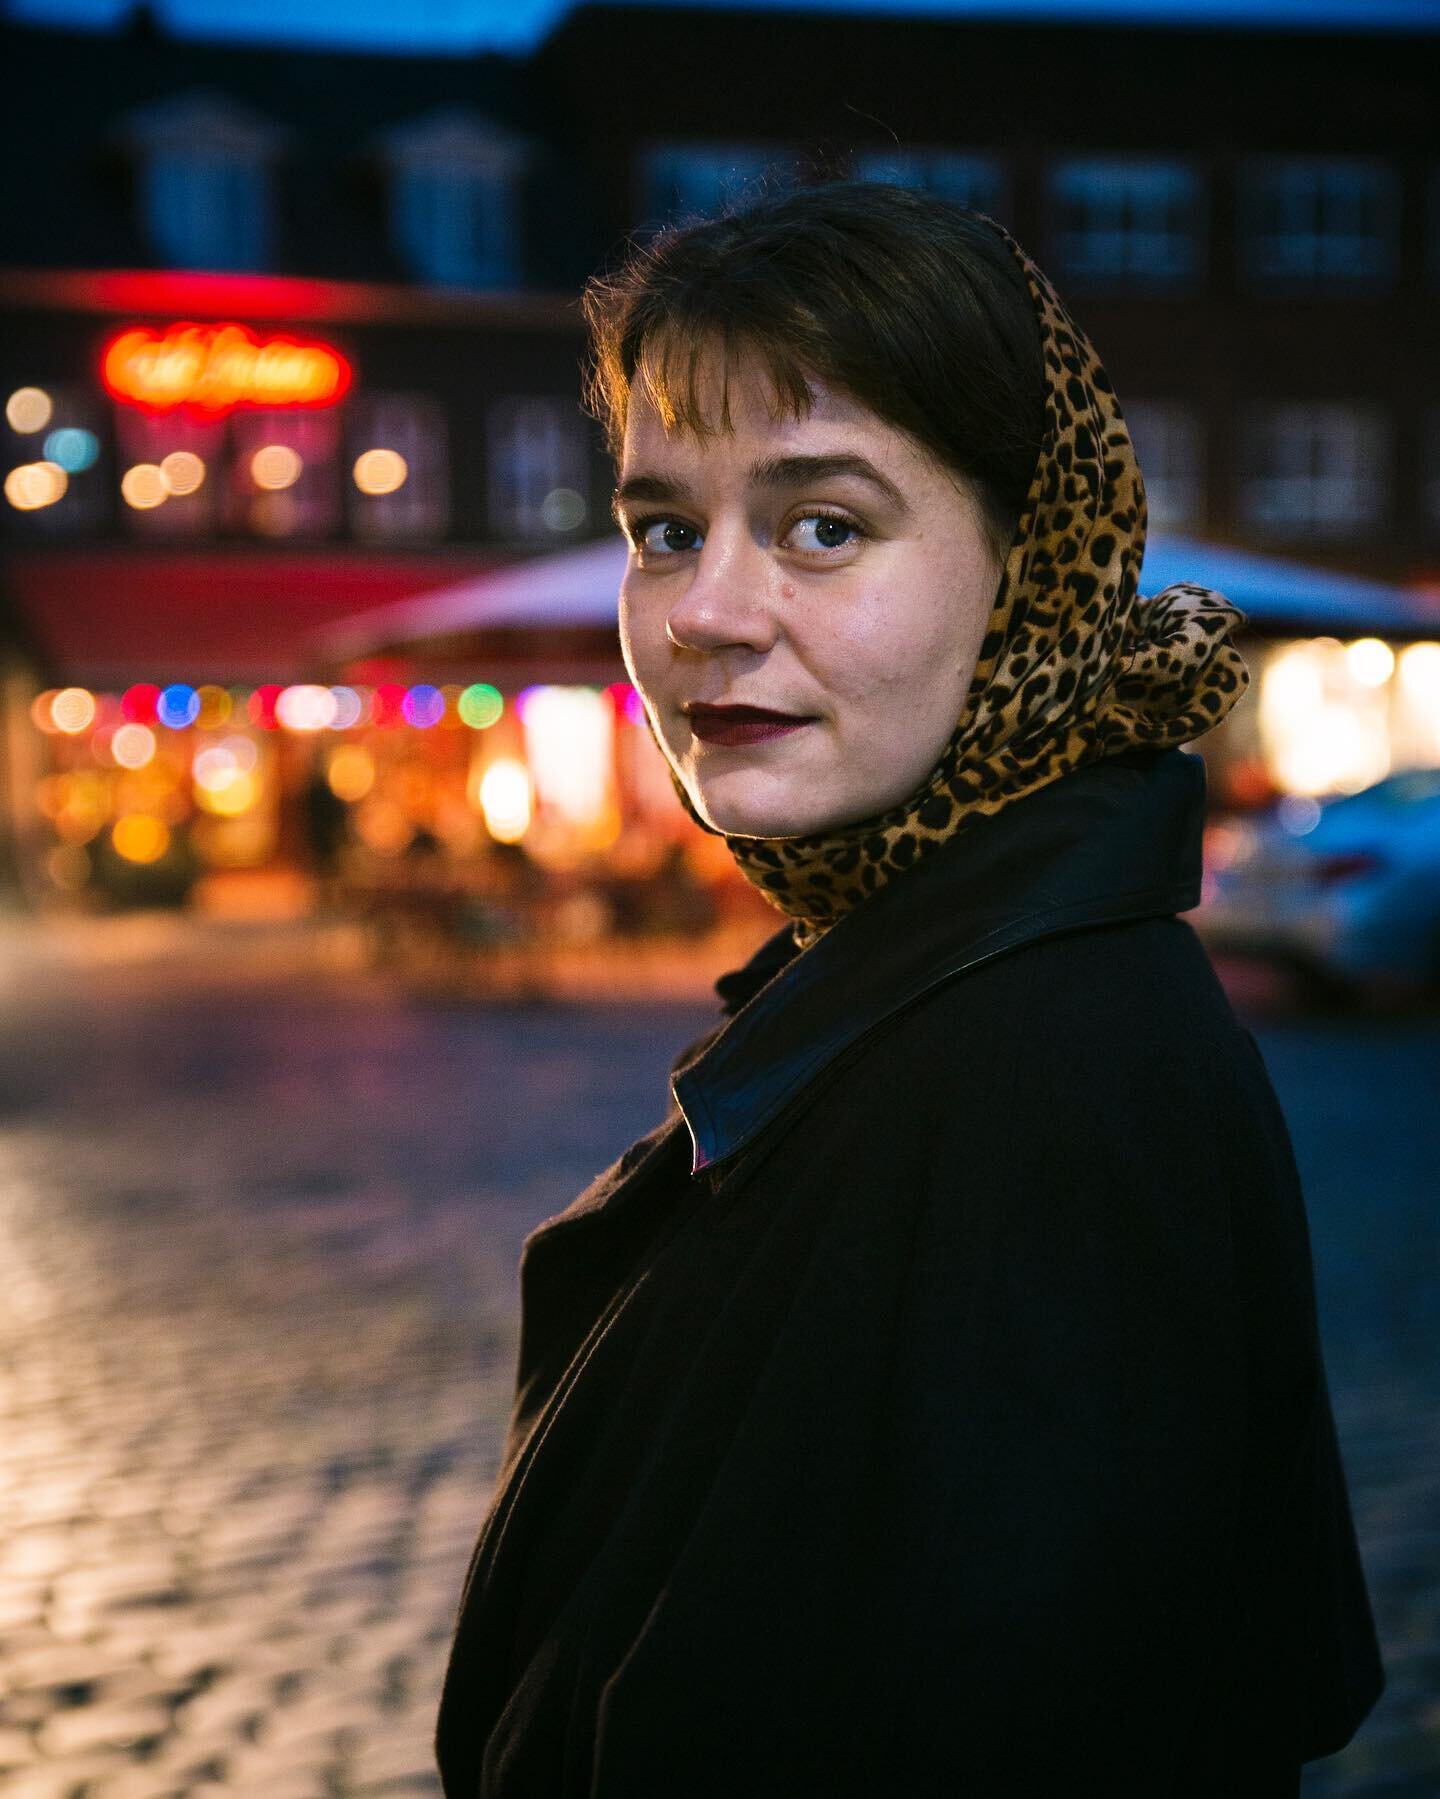 Johanne Luth is an Aarhus local and political science student. If you&rsquo;re given trouble, Luth recommends shouting back and giving yourself time to react by giving the perpetrators a shock. 
-
Another perspective on the nuances of walking at nigh